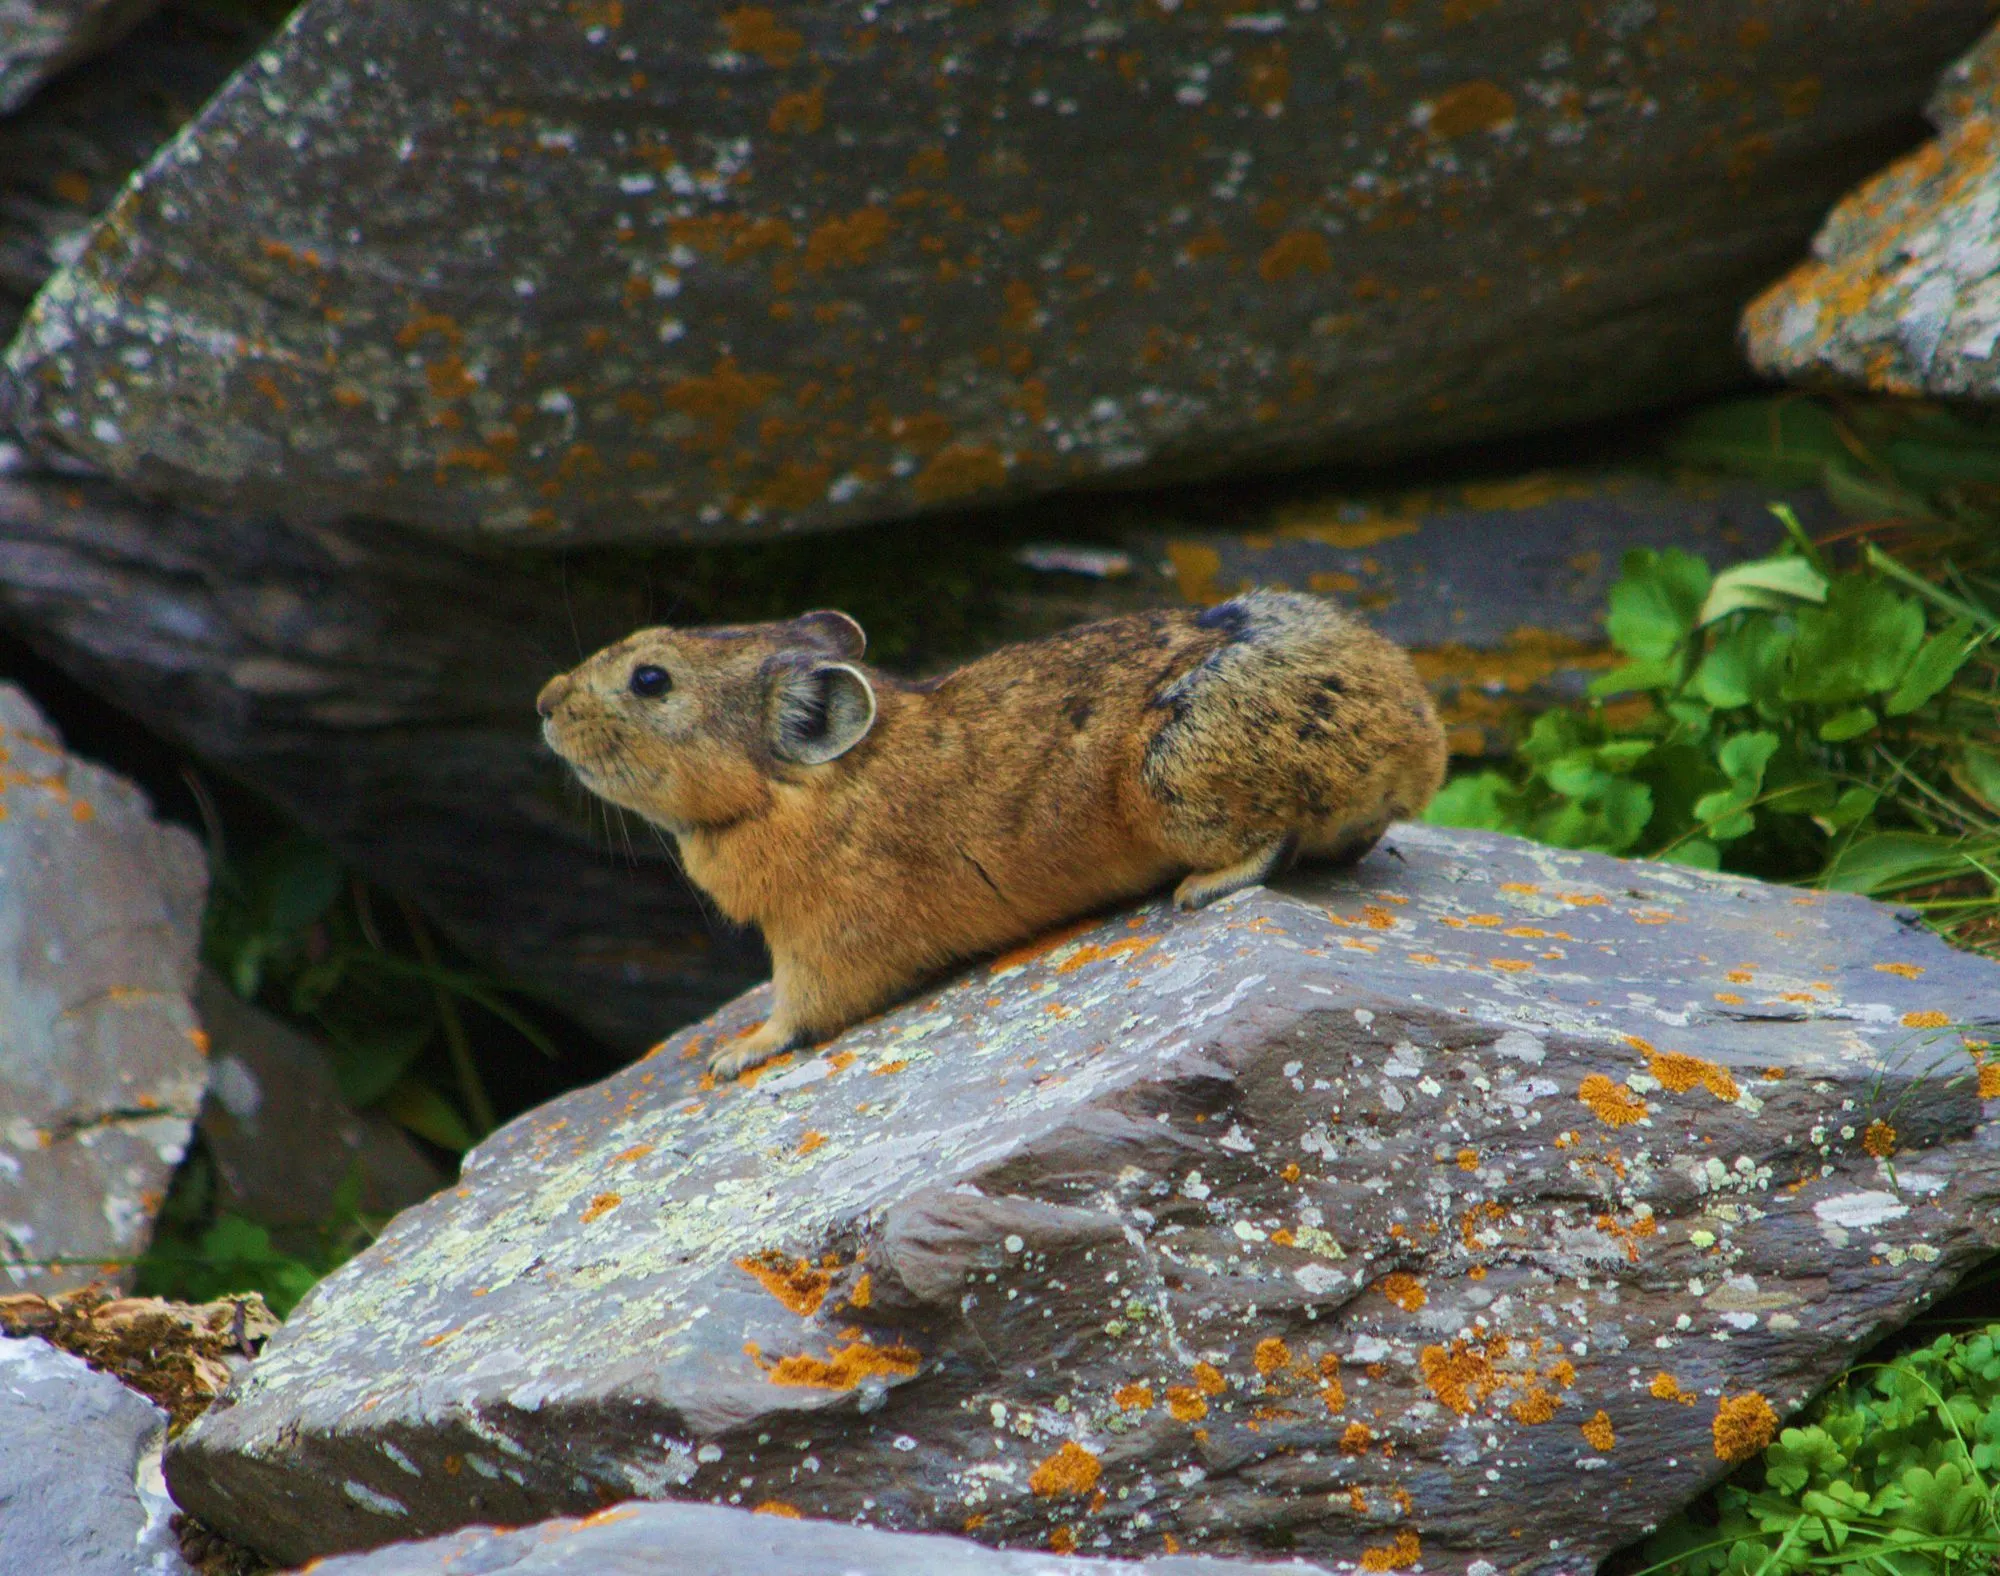 The alpine pikas are tiny wildlife creature who resembles the hares and rabbits species in length and size.